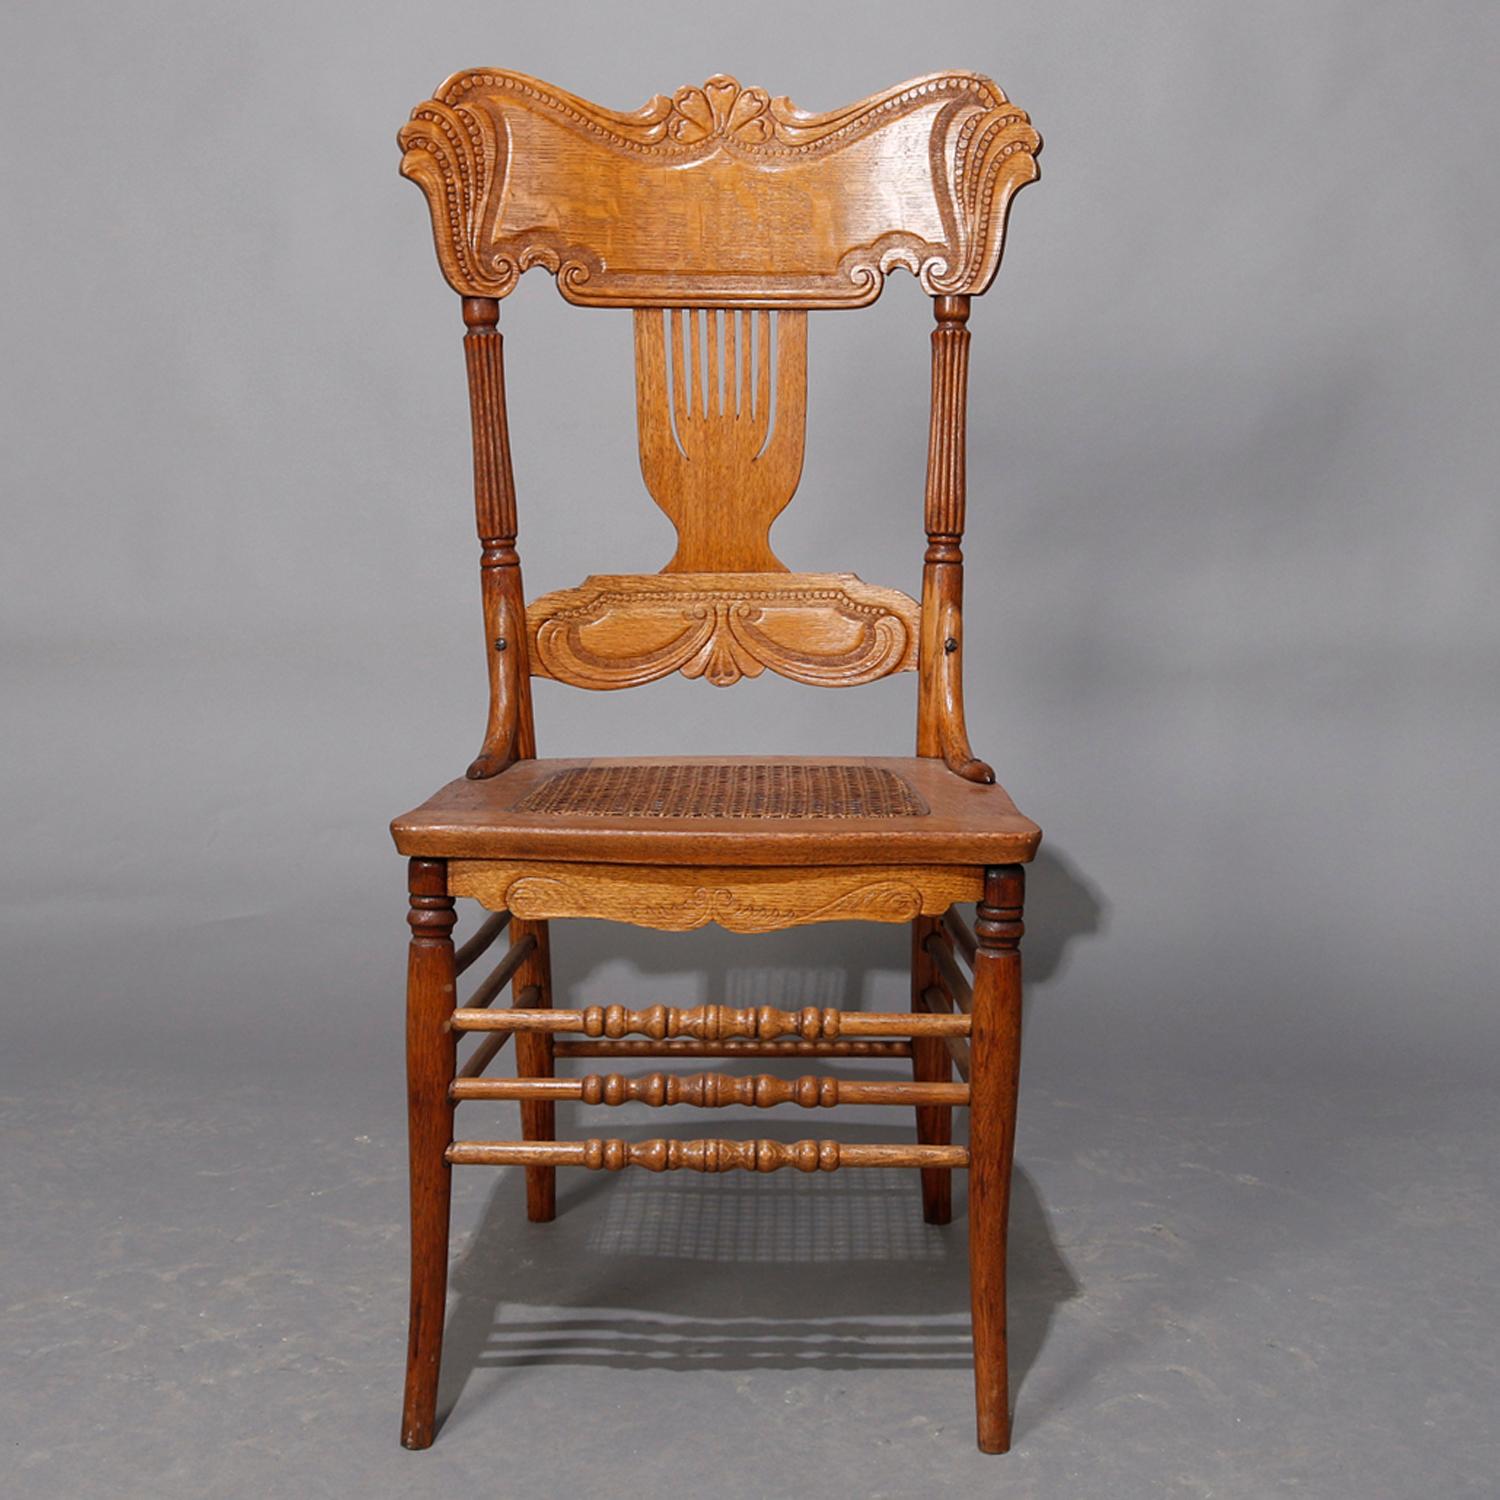 A set of 8 dining chairs by Heywood Wakefield offer pressed scroll and foliate backs over caned seats and raised on turned legs, oak pressed back Heywood Wakefield dining chairs

Measures: 40